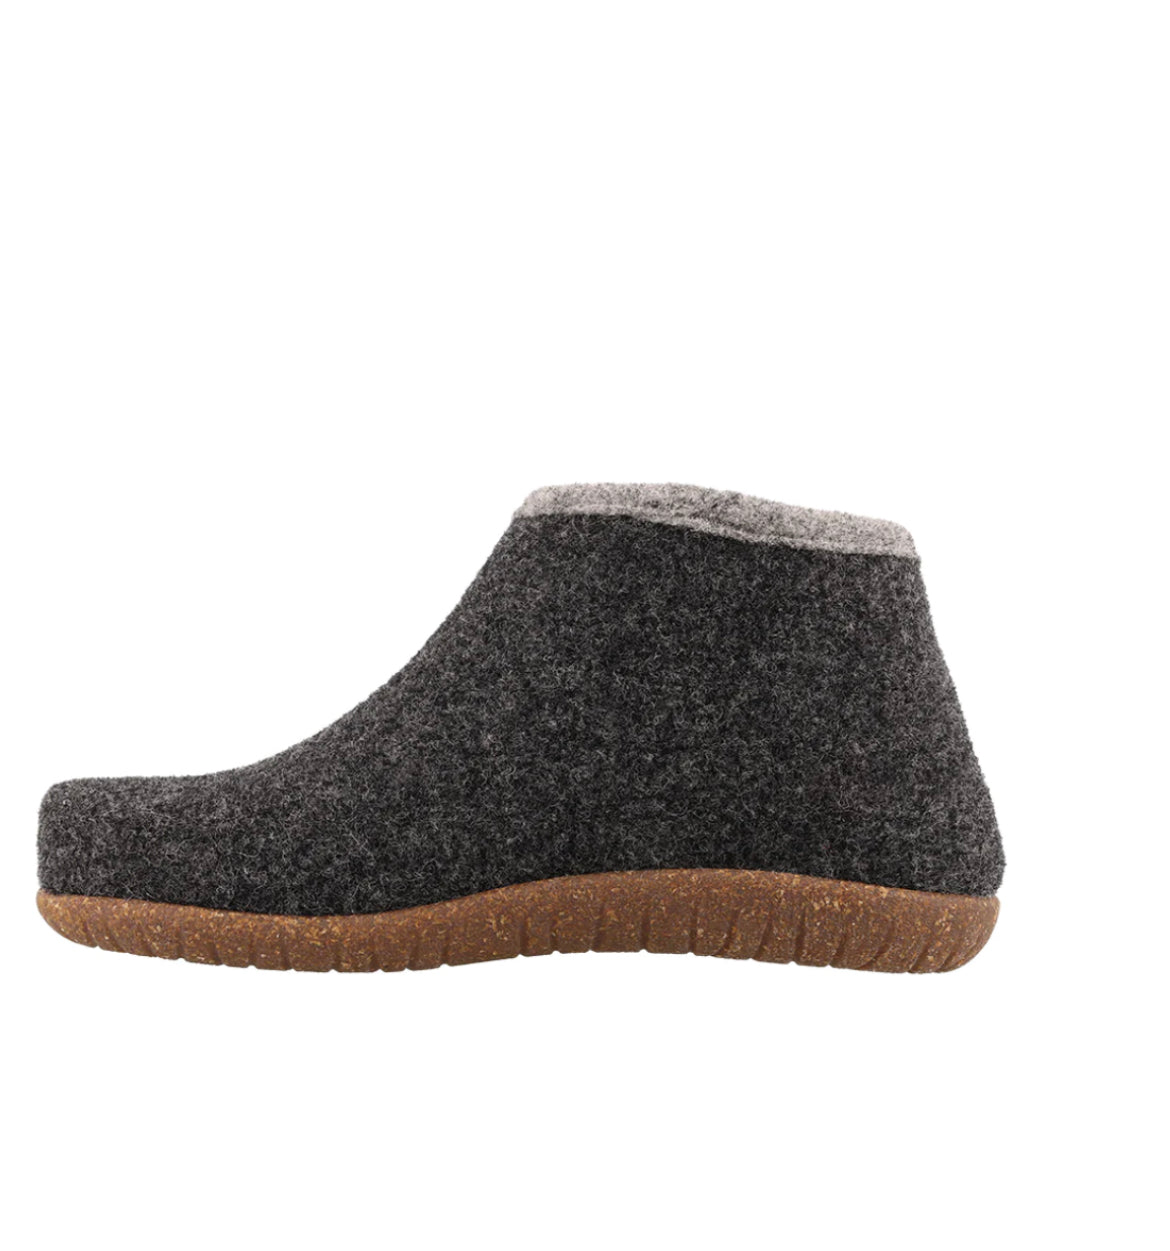 Taos Woolside Charcoal Shoe - All Mixed Up 